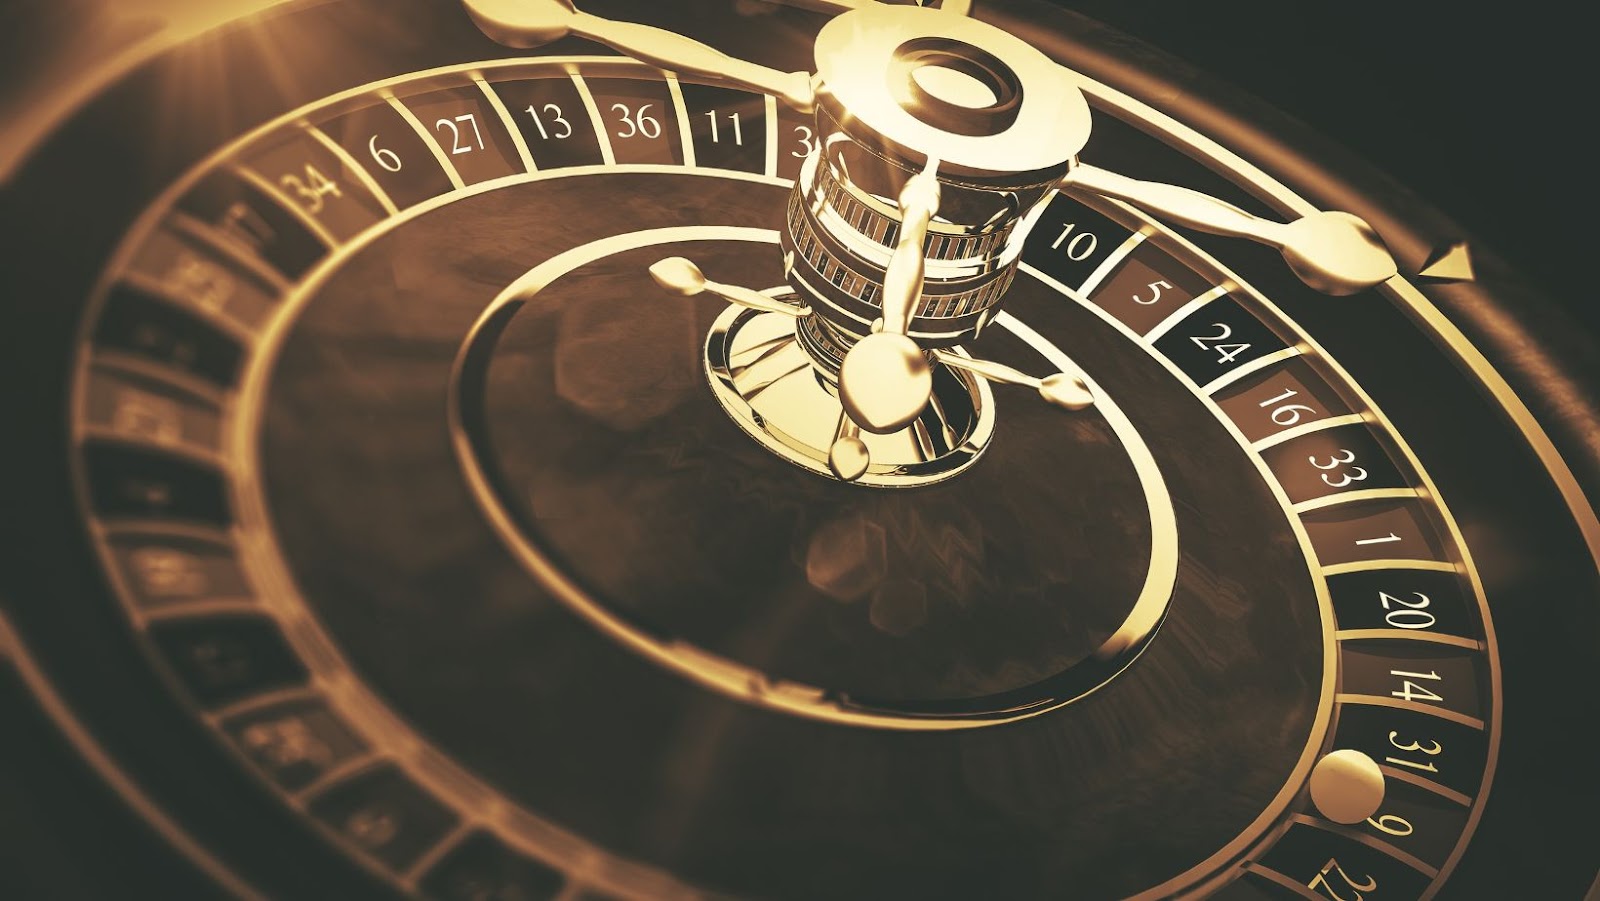 6 Tips on How to Maximize Your Online Casino Bonuses